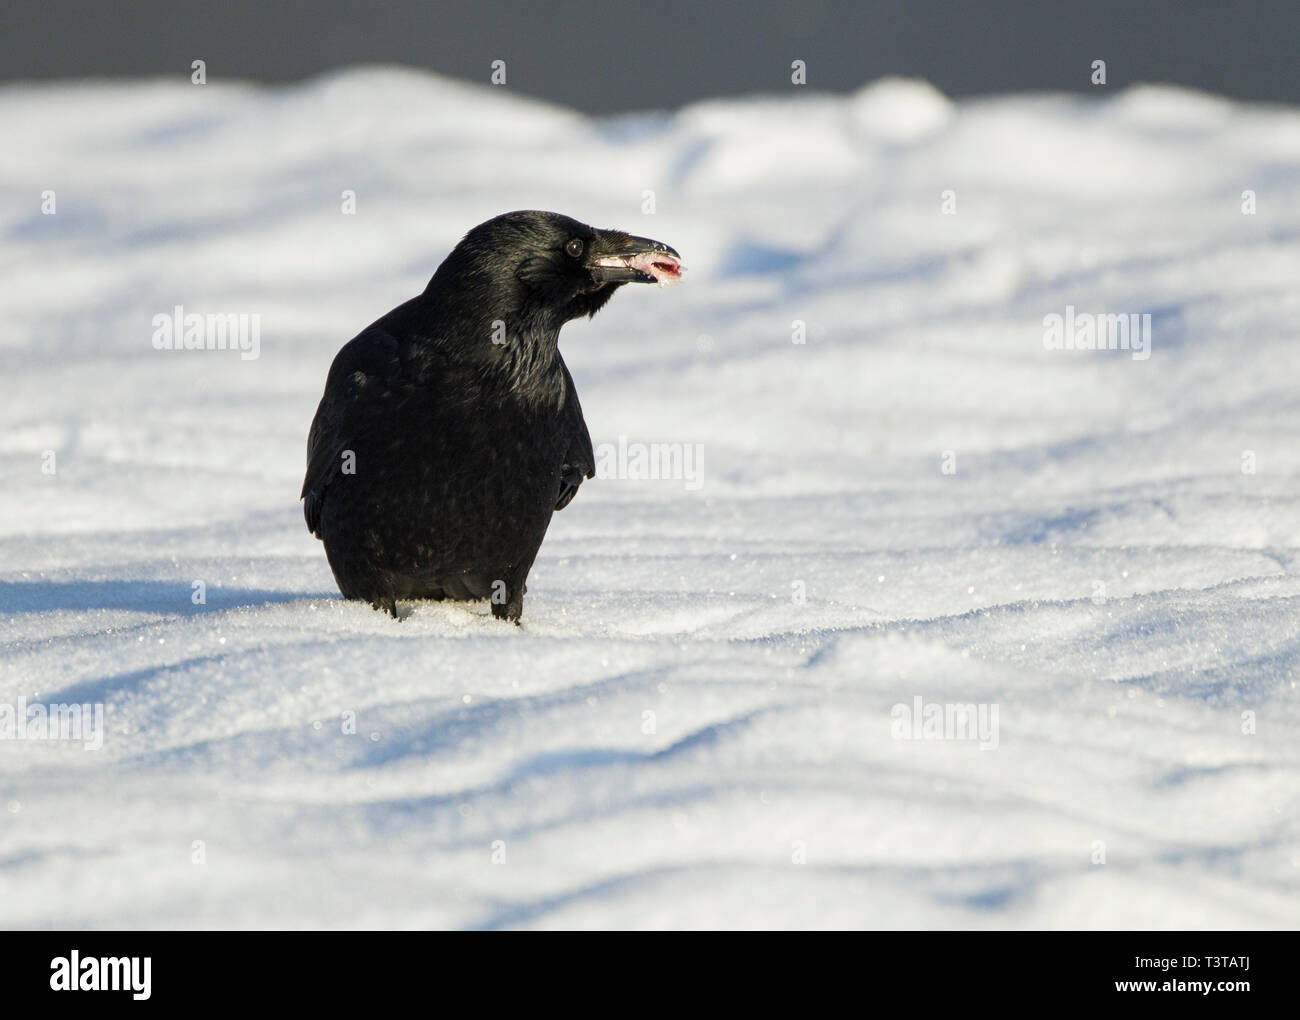 Carrion Crow standing on snow with food in his bill Stock Photo